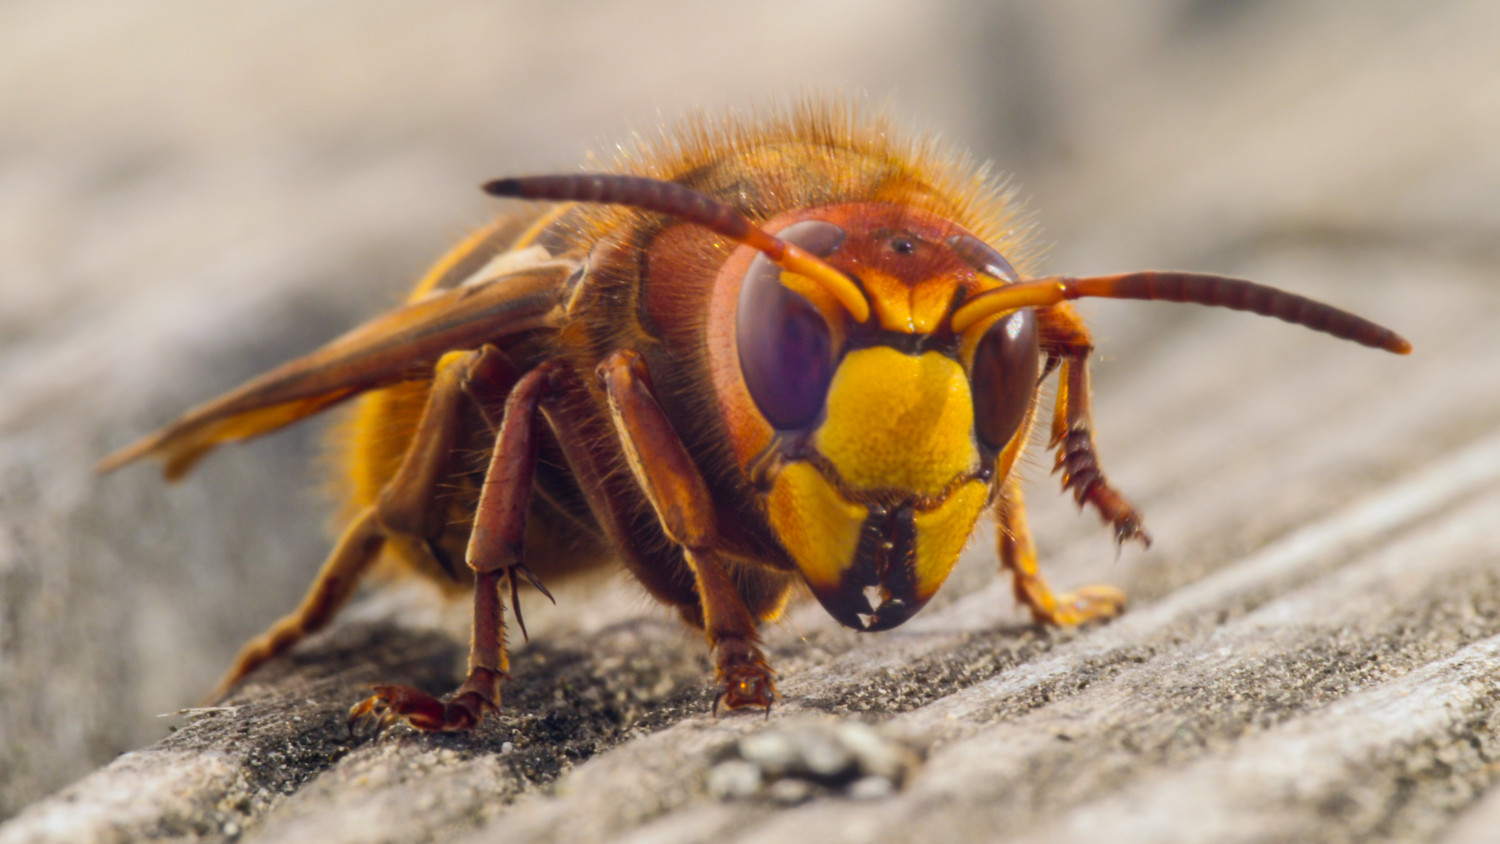 hornet close up details of fear-inducing insect